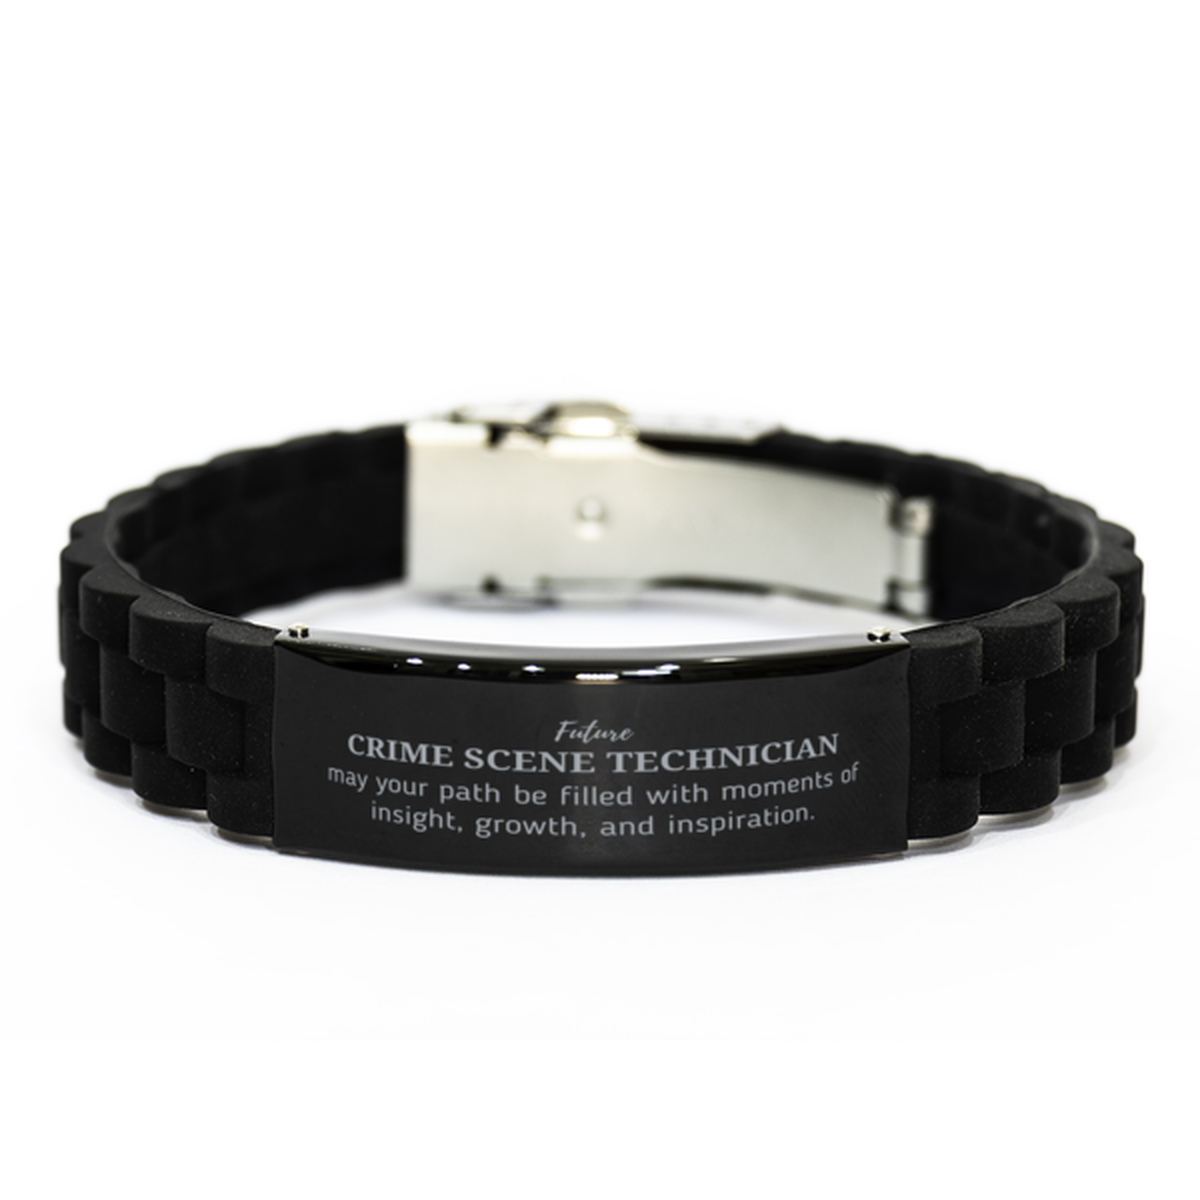 Future Crime Scene Technician Gifts, May your path be filled with moments of insight, Graduation Gifts for New Crime Scene Technician, Christmas Unique Black Glidelock Clasp Bracelet For Men, Women, Friends